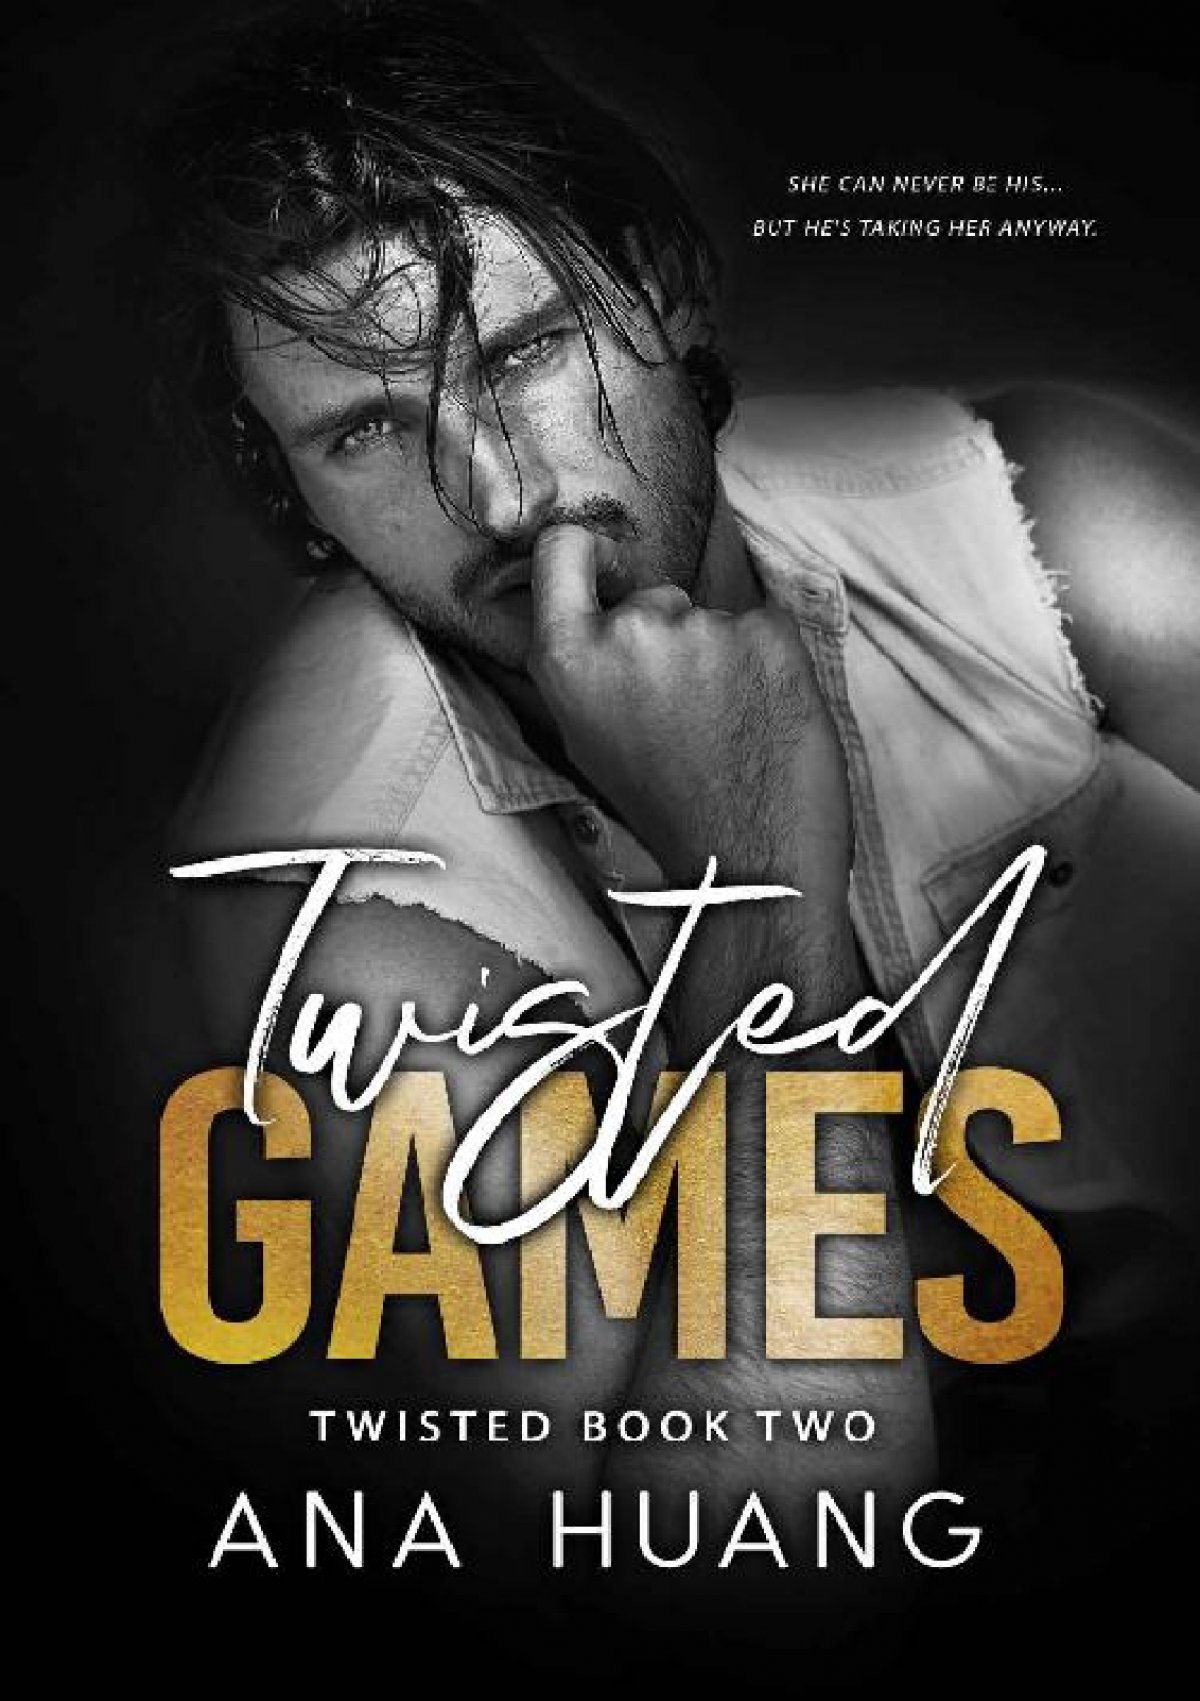 Check out medelgad23's Shuffles Twisted love by Ana huang #twistedlove  #twistedseries